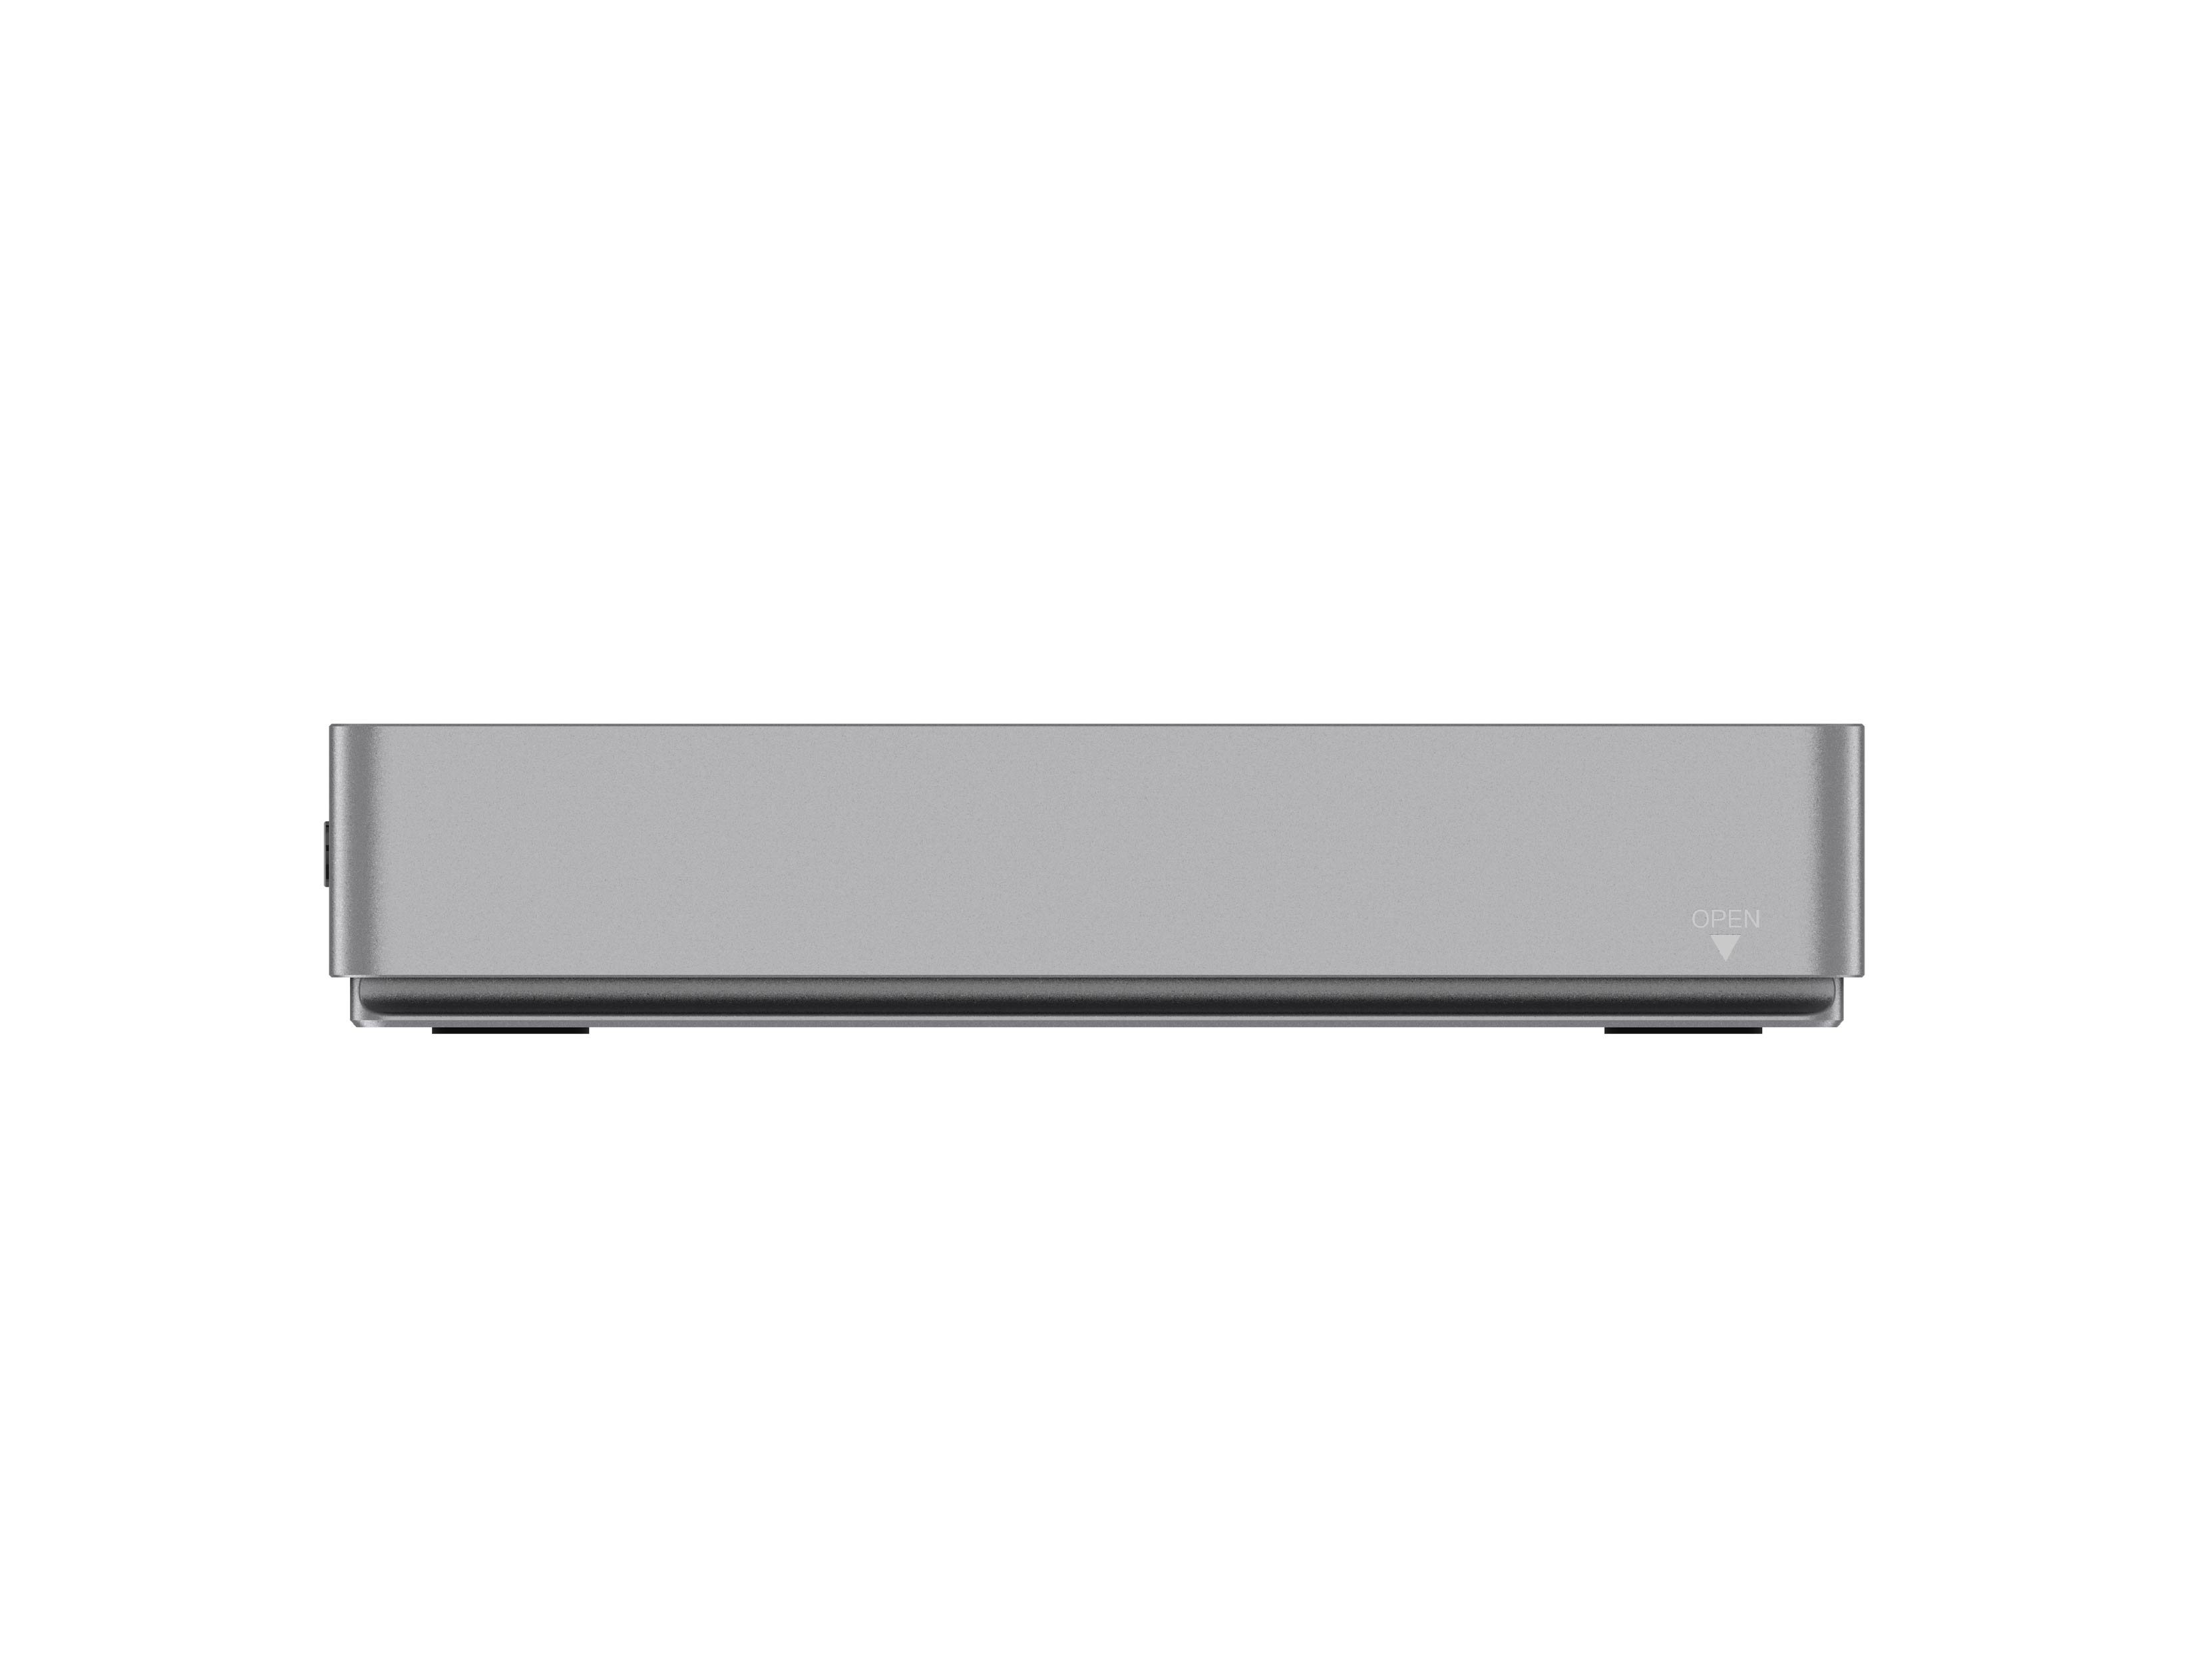 Dual RAID M.2 NVMe SSD Enclosure (SI-8029RUS32C), applicable two M.2 NVMe PCIe3x2 SSD, USB-C 20Gbps to host, supports RAID0, 1, LARGE, CLEAR mode.